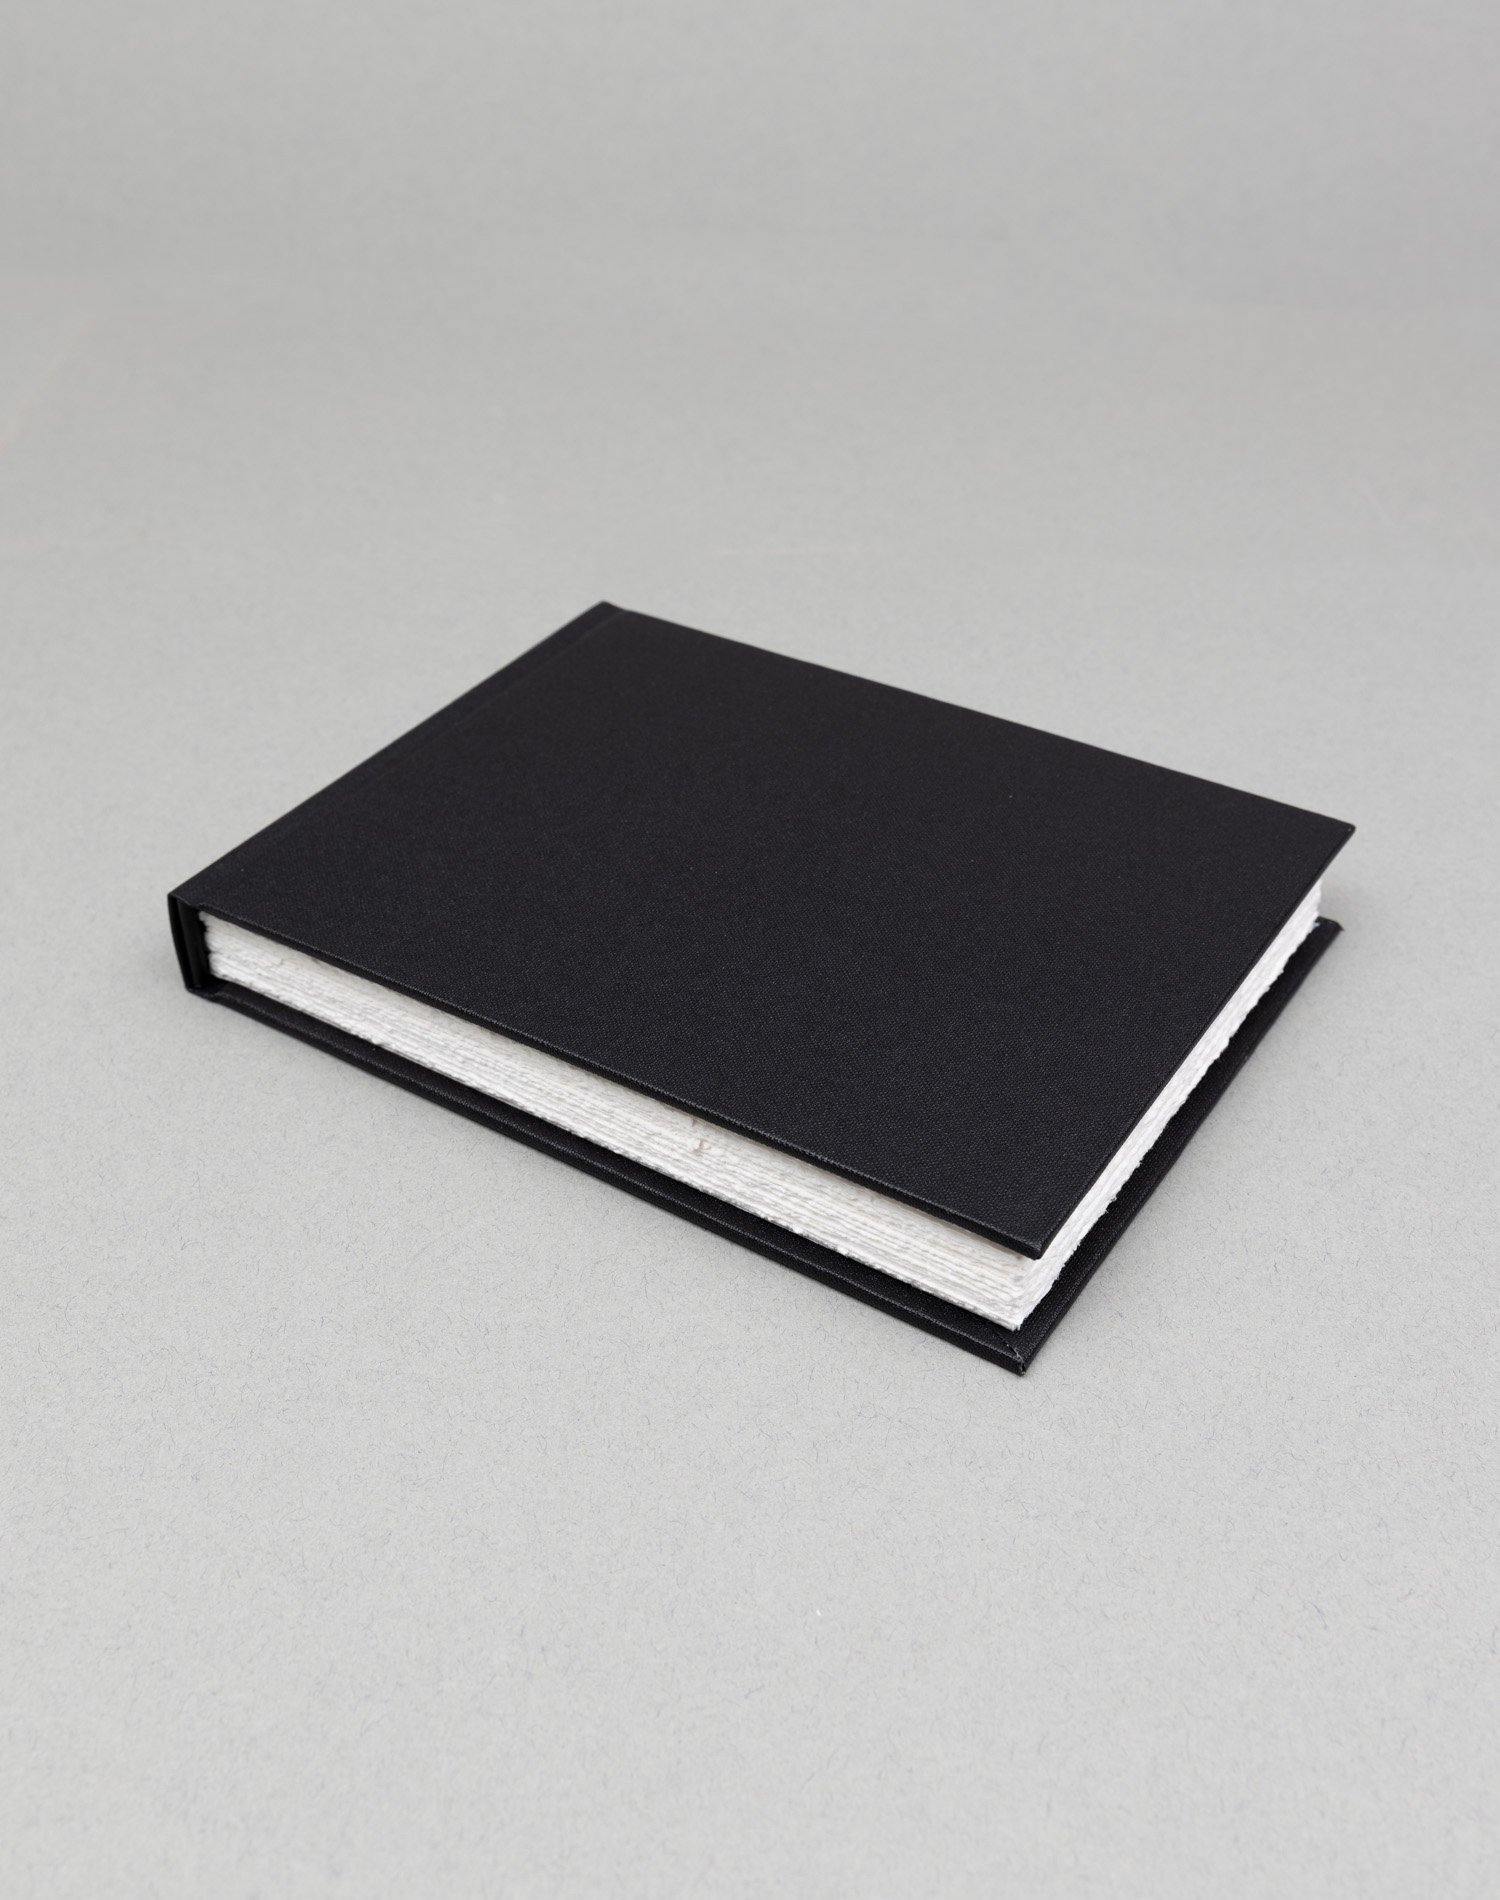 Personalized PaintIN Sketchbook with Blank Pages 300 gsm Suitable